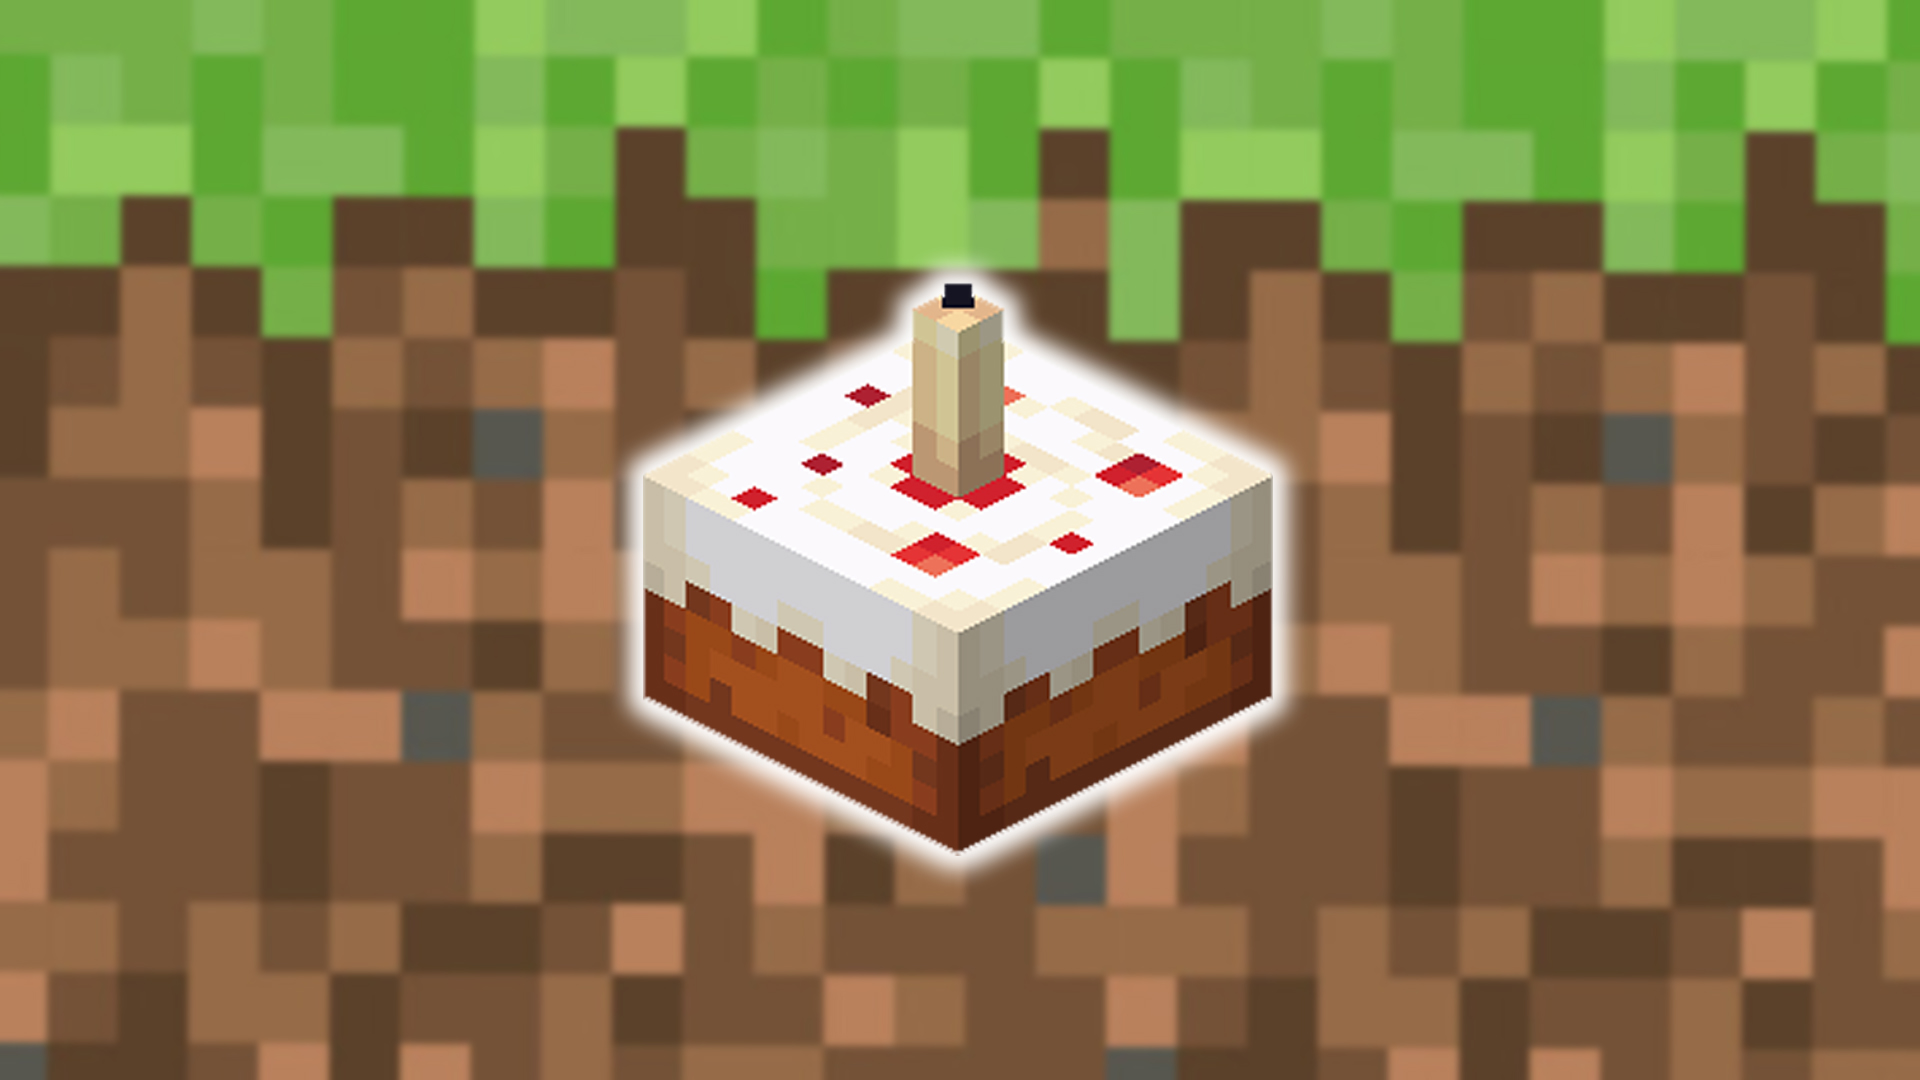 Making a Minecraft birthday cake - Opposable Thumbs